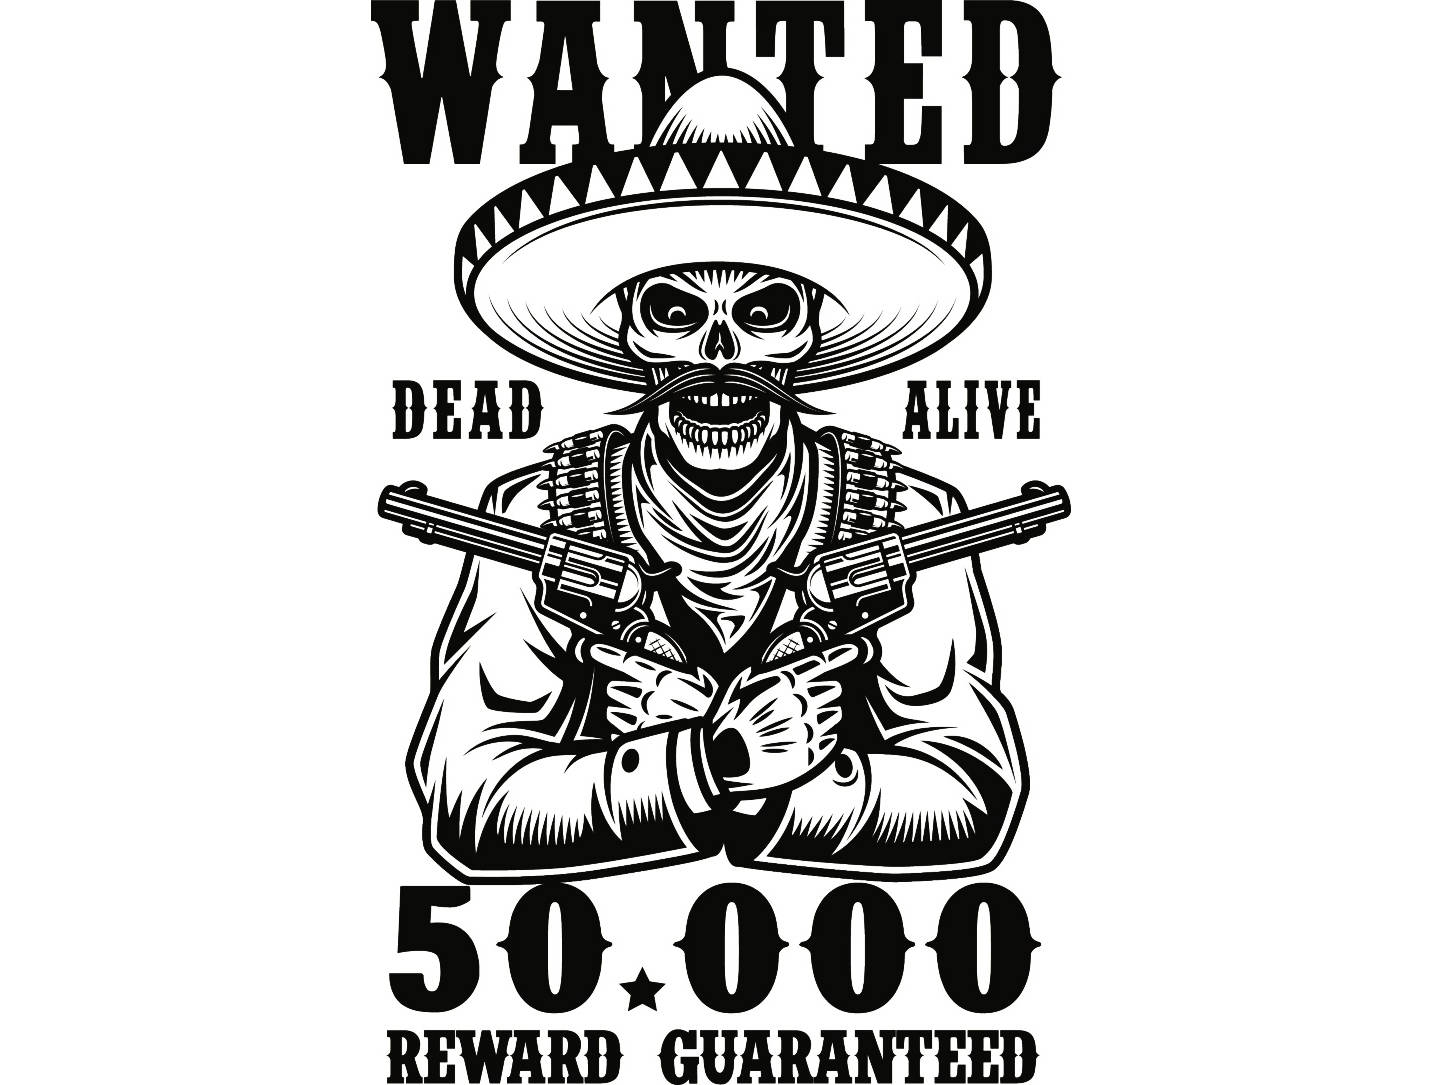 Download Cowboy Logo #19 Wanted Poster Gun Skull Sombrero Outlaw Western Hat Rodeo Ranch Old Wild West ...